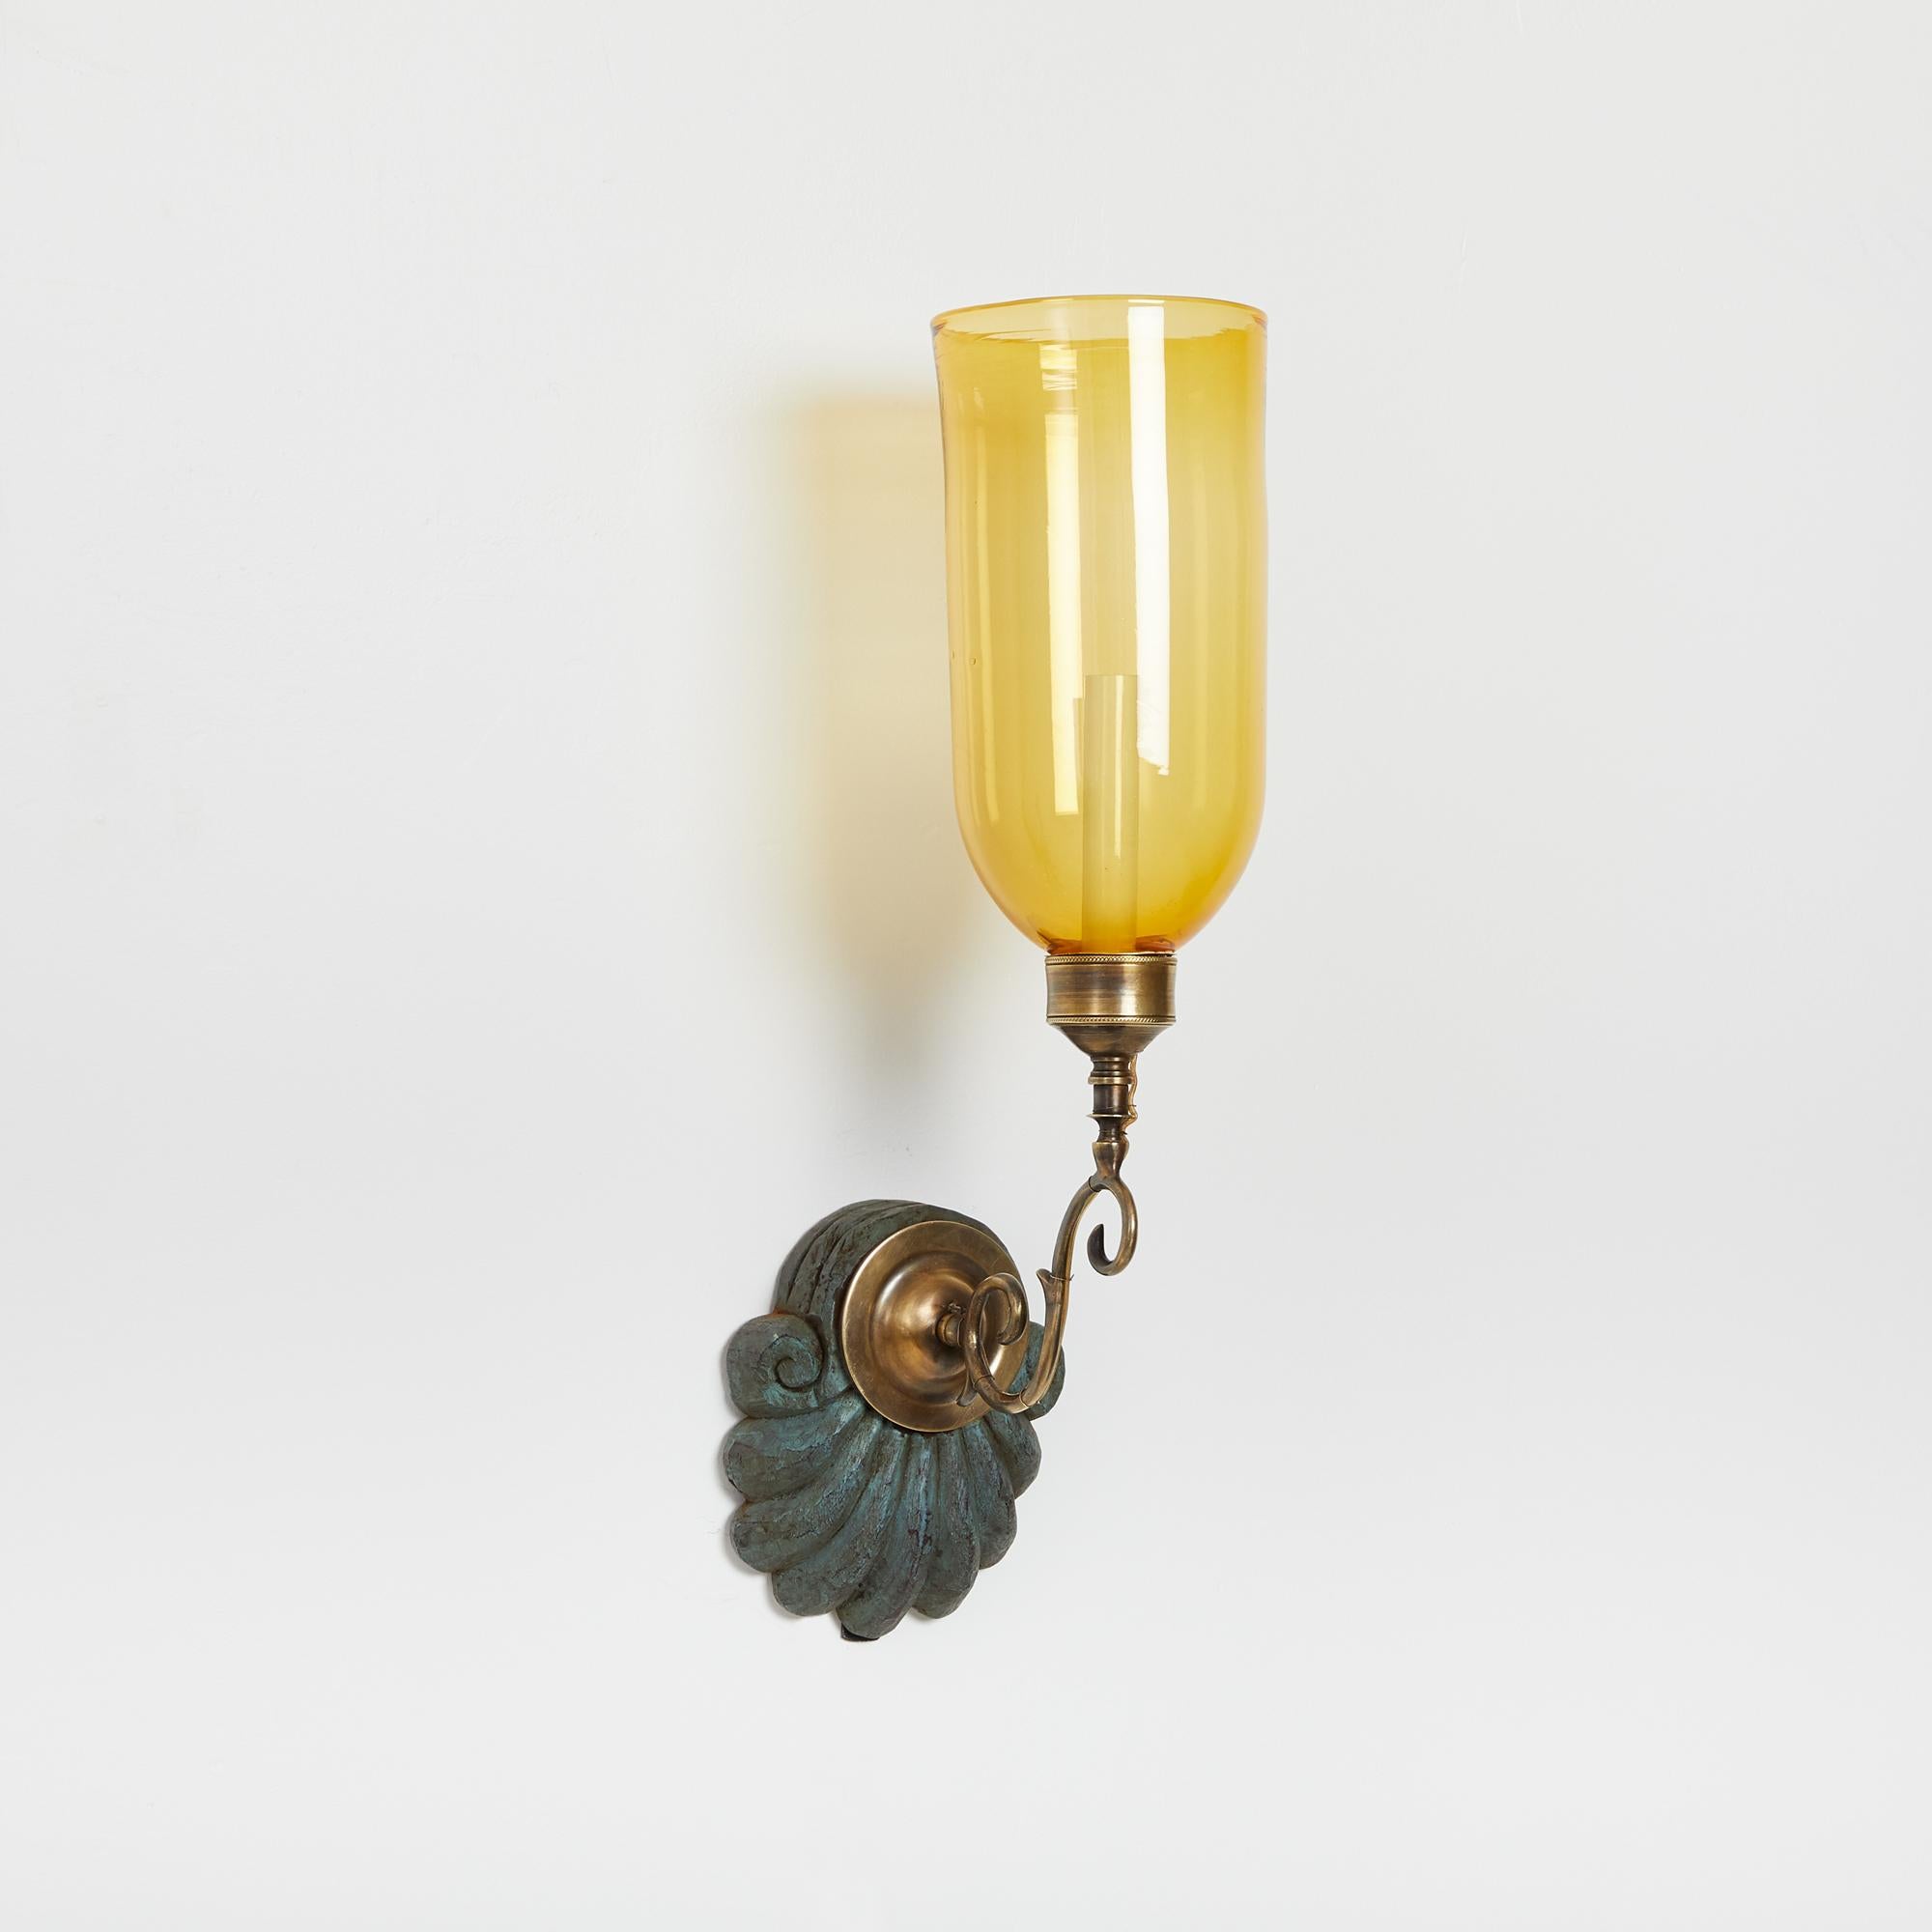 A pair of antique hand-carved shell form mahogany Anglo Indian styled backplates with verdigris finish, patinated brass sconce fittings and yellow glass hurricane shades. Electrified with one candelabra base socket per sconce.

Our custom hurricane